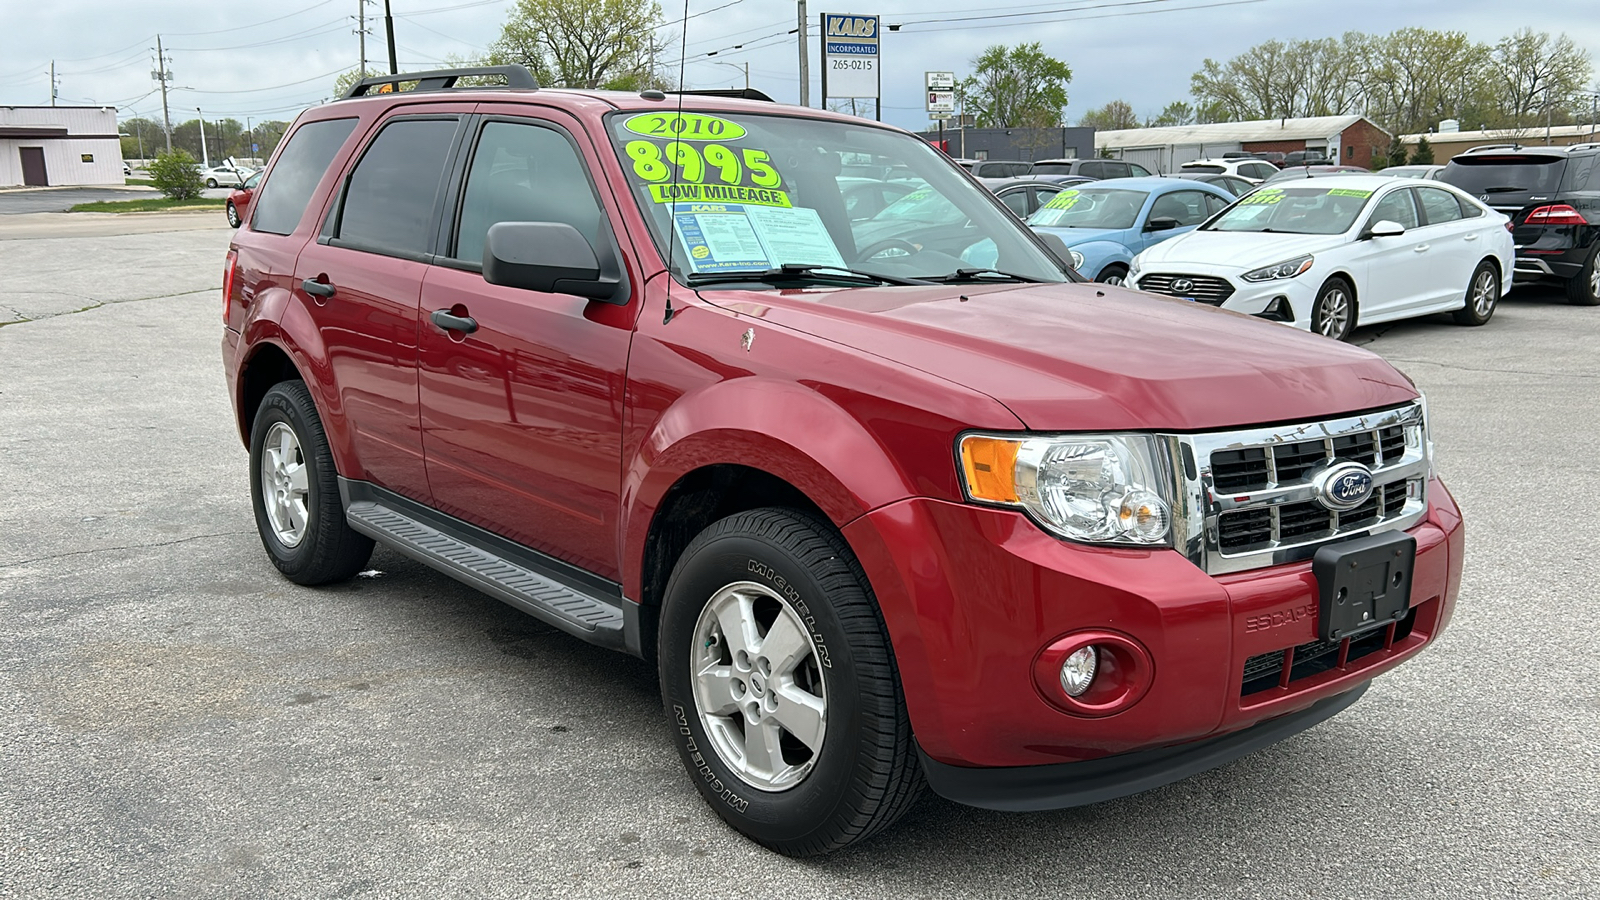 2010 Ford Escape XLT 4